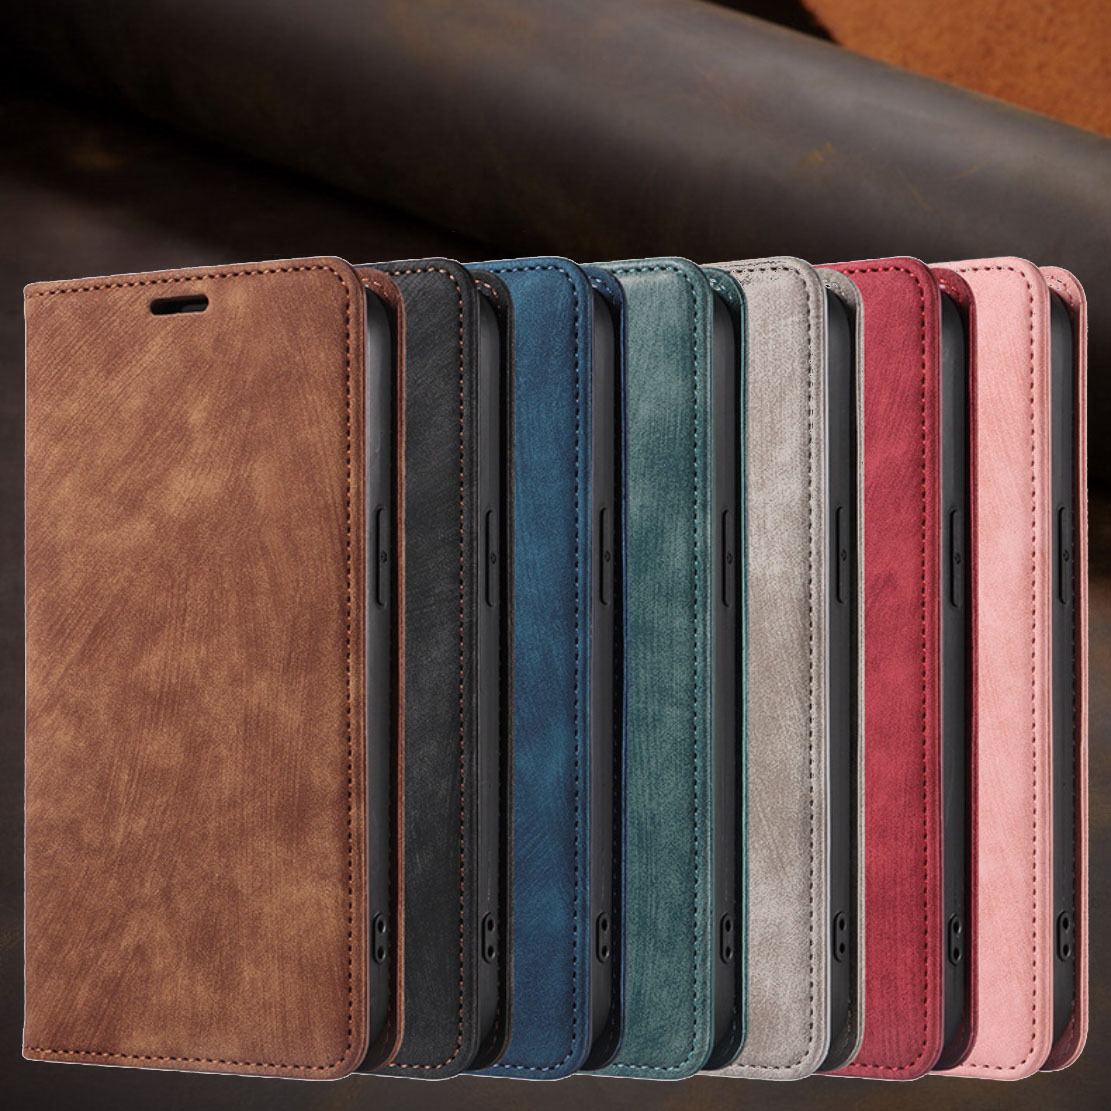  notebook type smartphone case high quality leather iphone 13promax correspondence leather style blue ka Barker do storage 